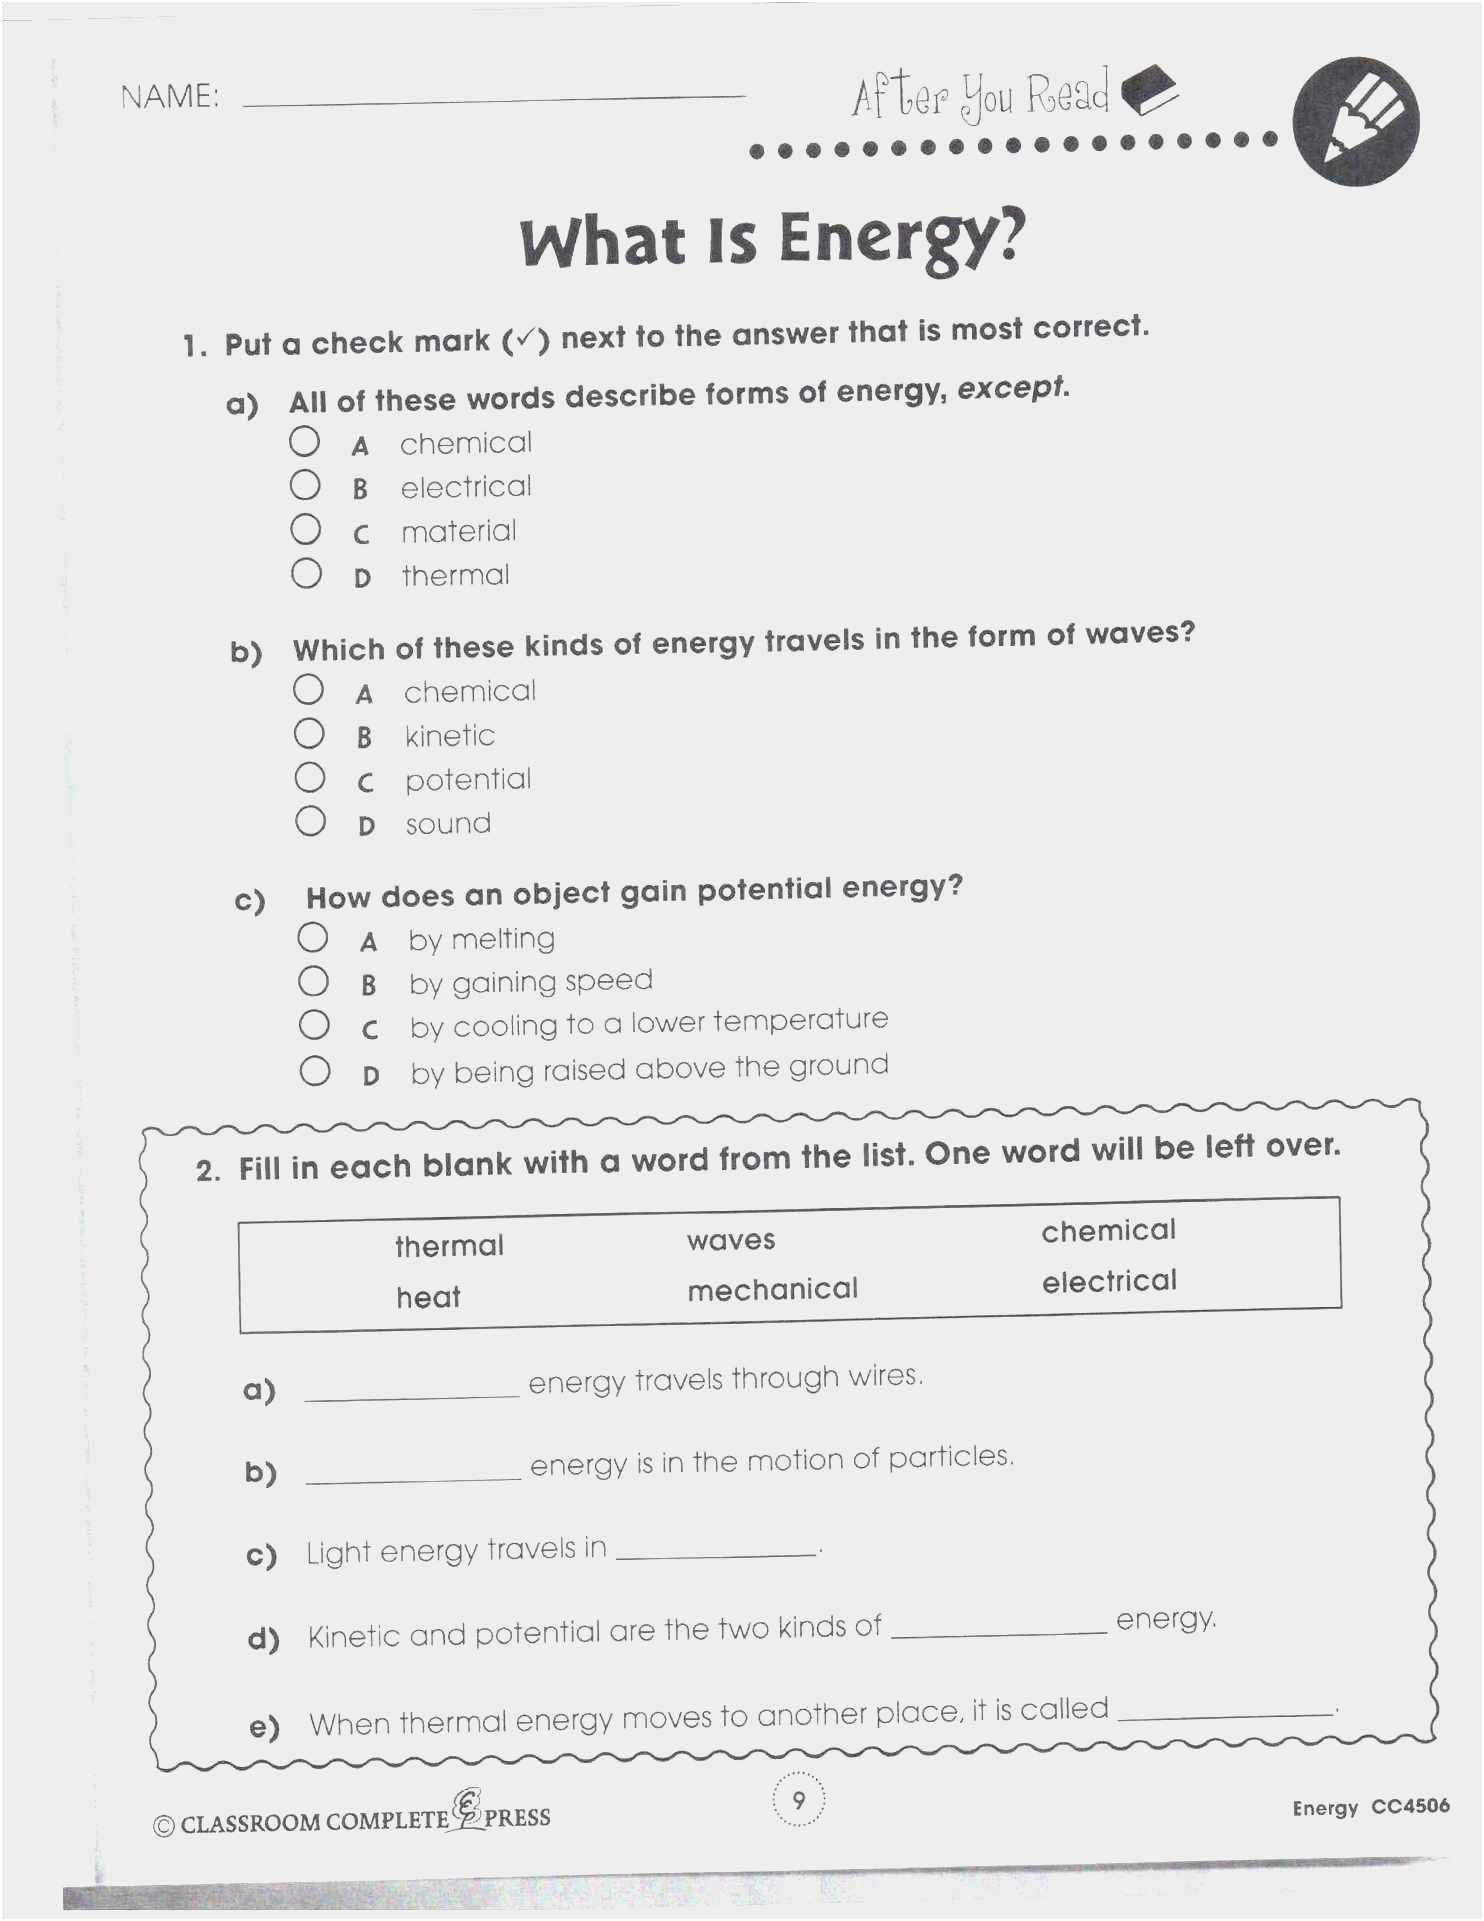 Bill Nye Energy Worksheet Light Class 8 Worksheets with Answers